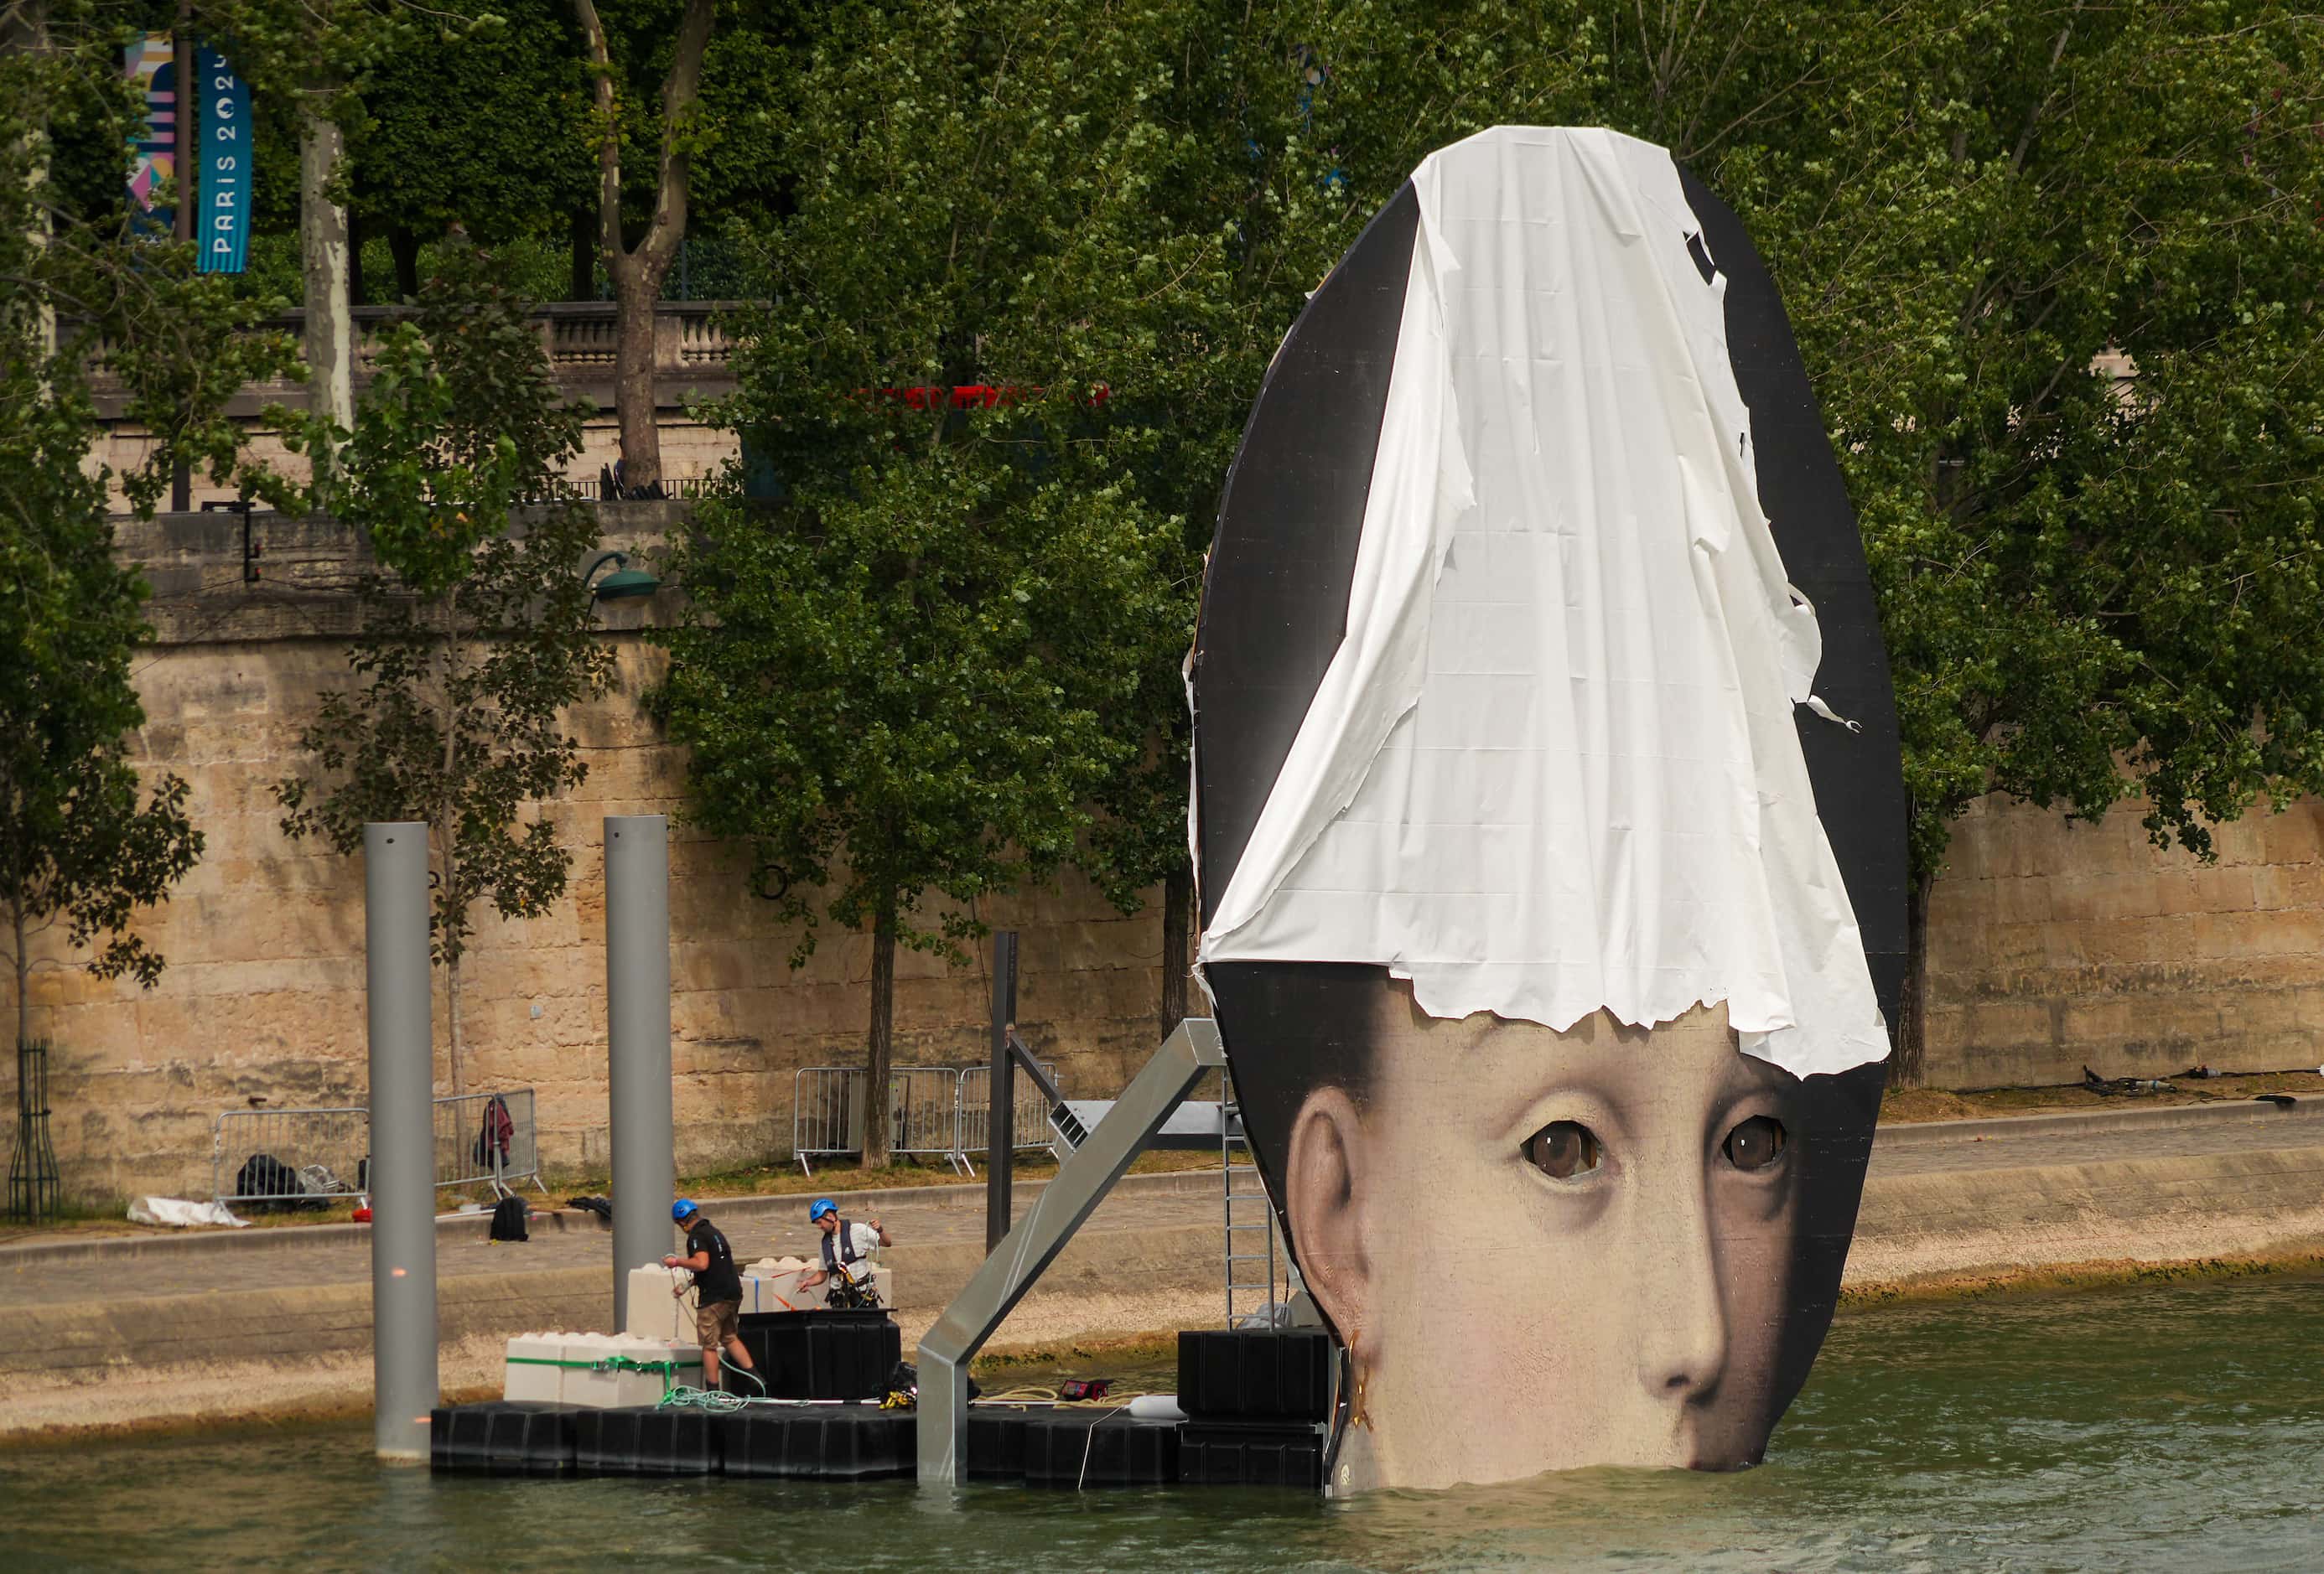 Workers make preparations for opening ceremonies along the River Seine ahead of the 2024...